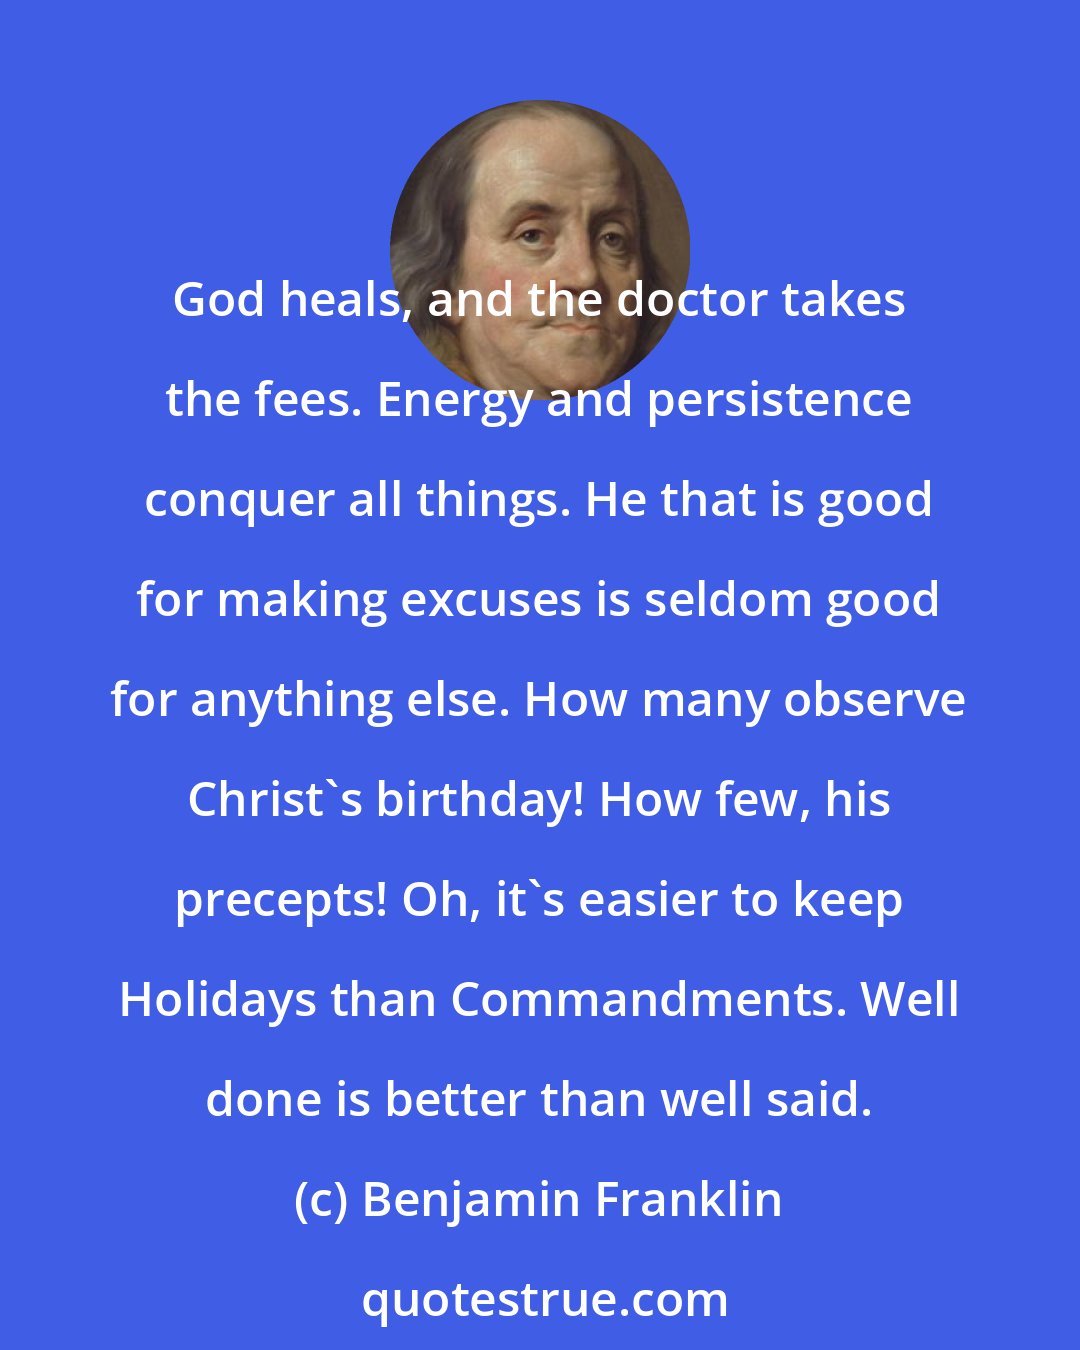 Benjamin Franklin: God heals, and the doctor takes the fees. Energy and persistence conquer all things. He that is good for making excuses is seldom good for anything else. How many observe Christ's birthday! How few, his precepts! Oh, it's easier to keep Holidays than Commandments. Well done is better than well said.